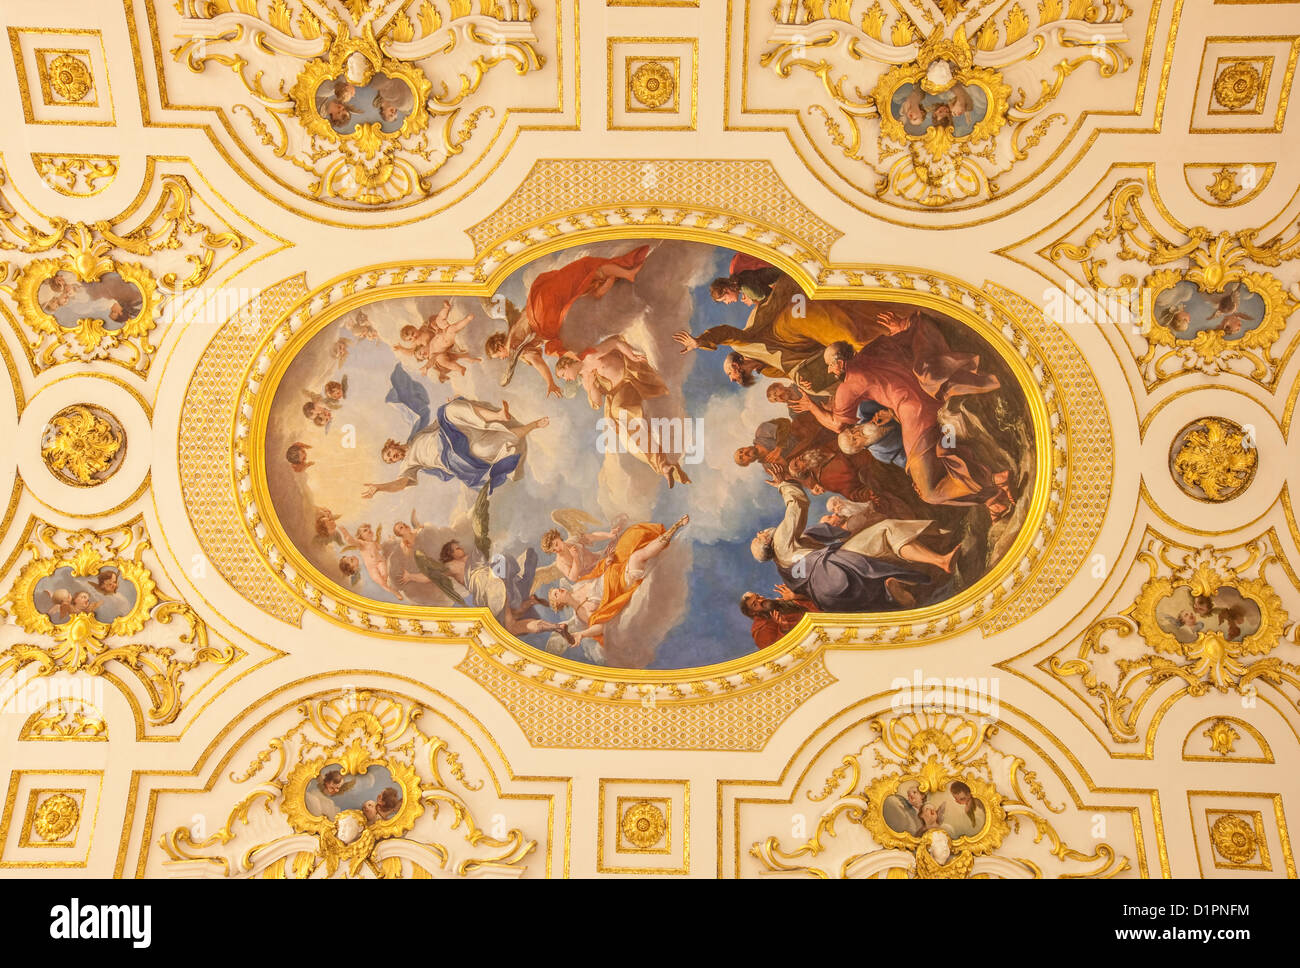 The ceiling of St. Michael and All Angels Church, Great Witley, Worcestershire, England, UK Stock Photo